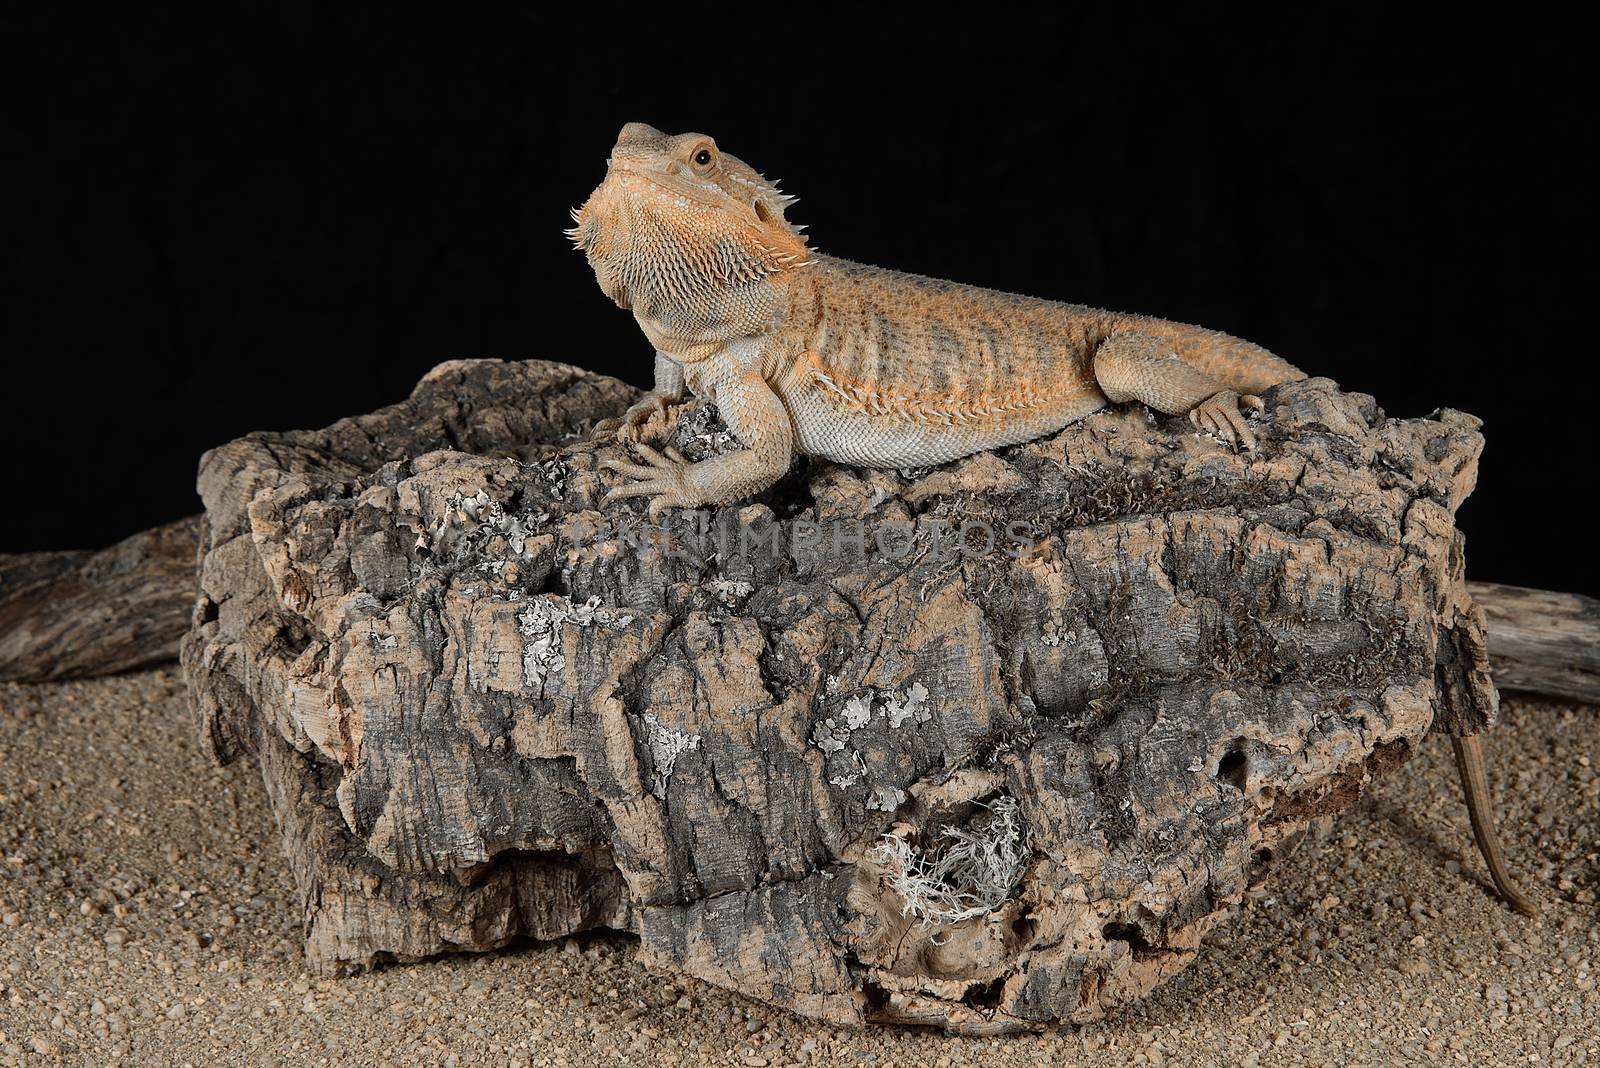 Full length photograph of an alert bearded dragon resting on a log against a black background